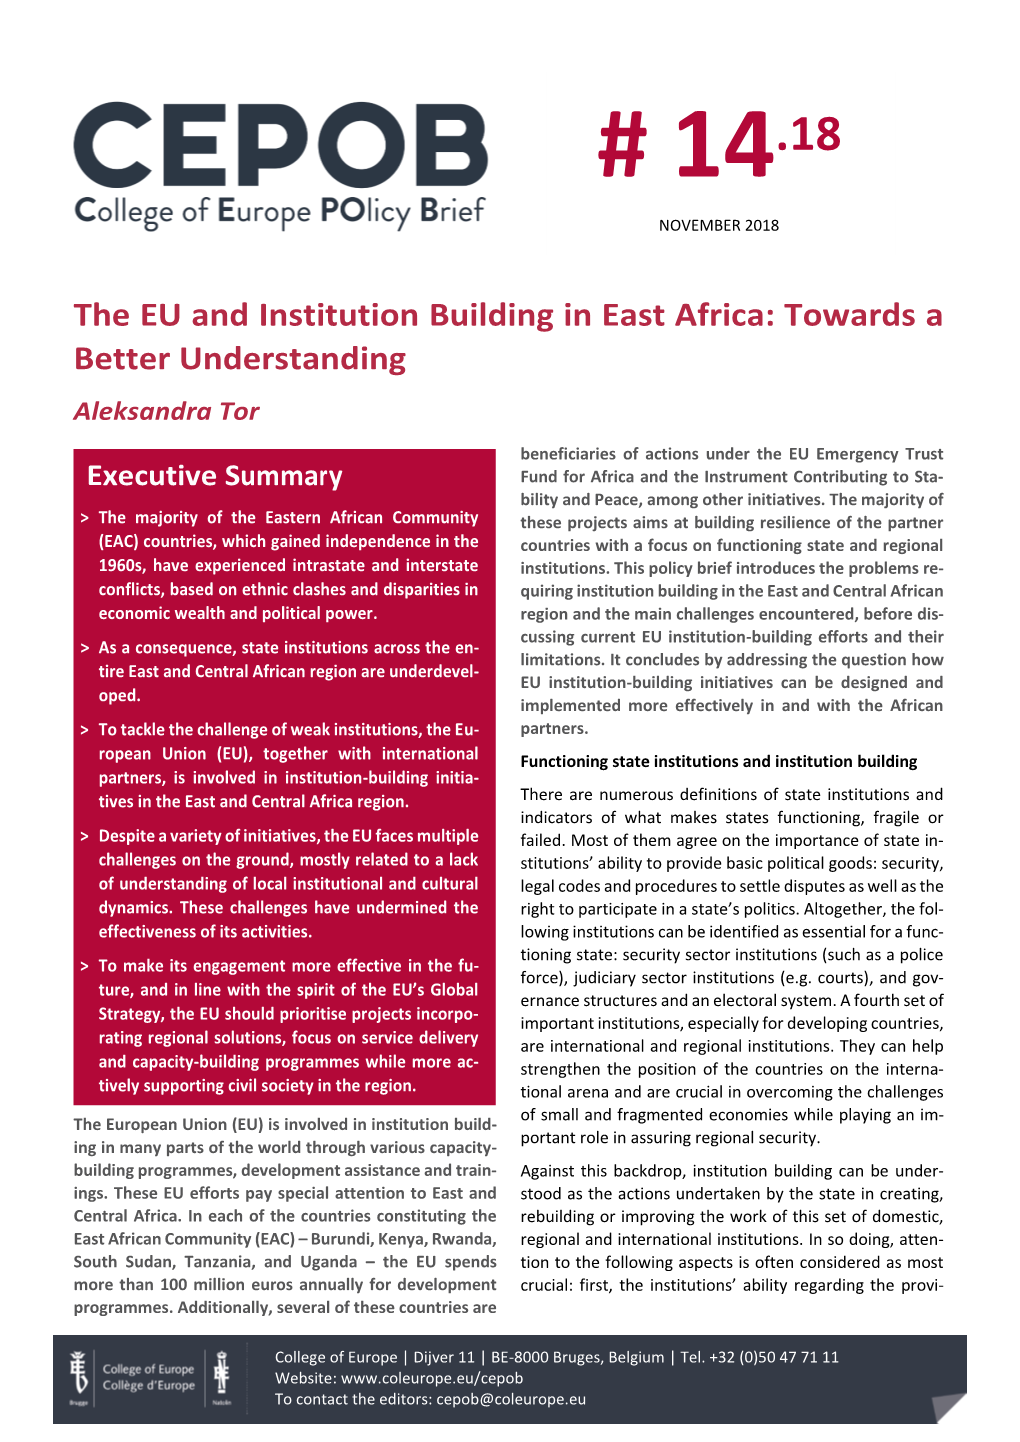 The EU and Institution Building in East Africa: Towards a Better Understanding Aleksandra Tor